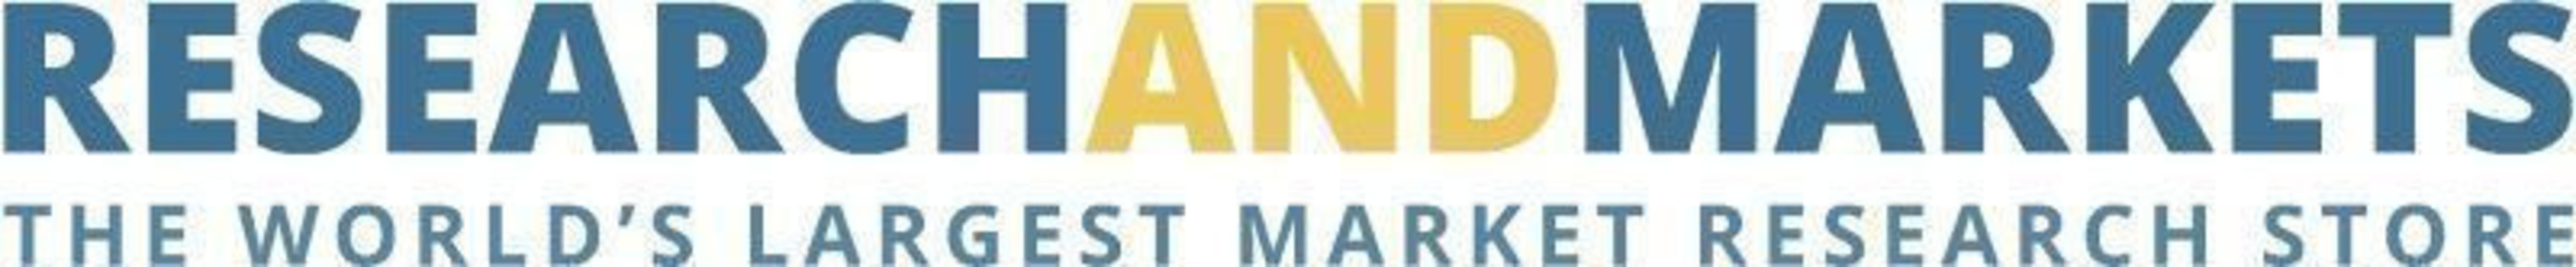 Research and Markets Logo.